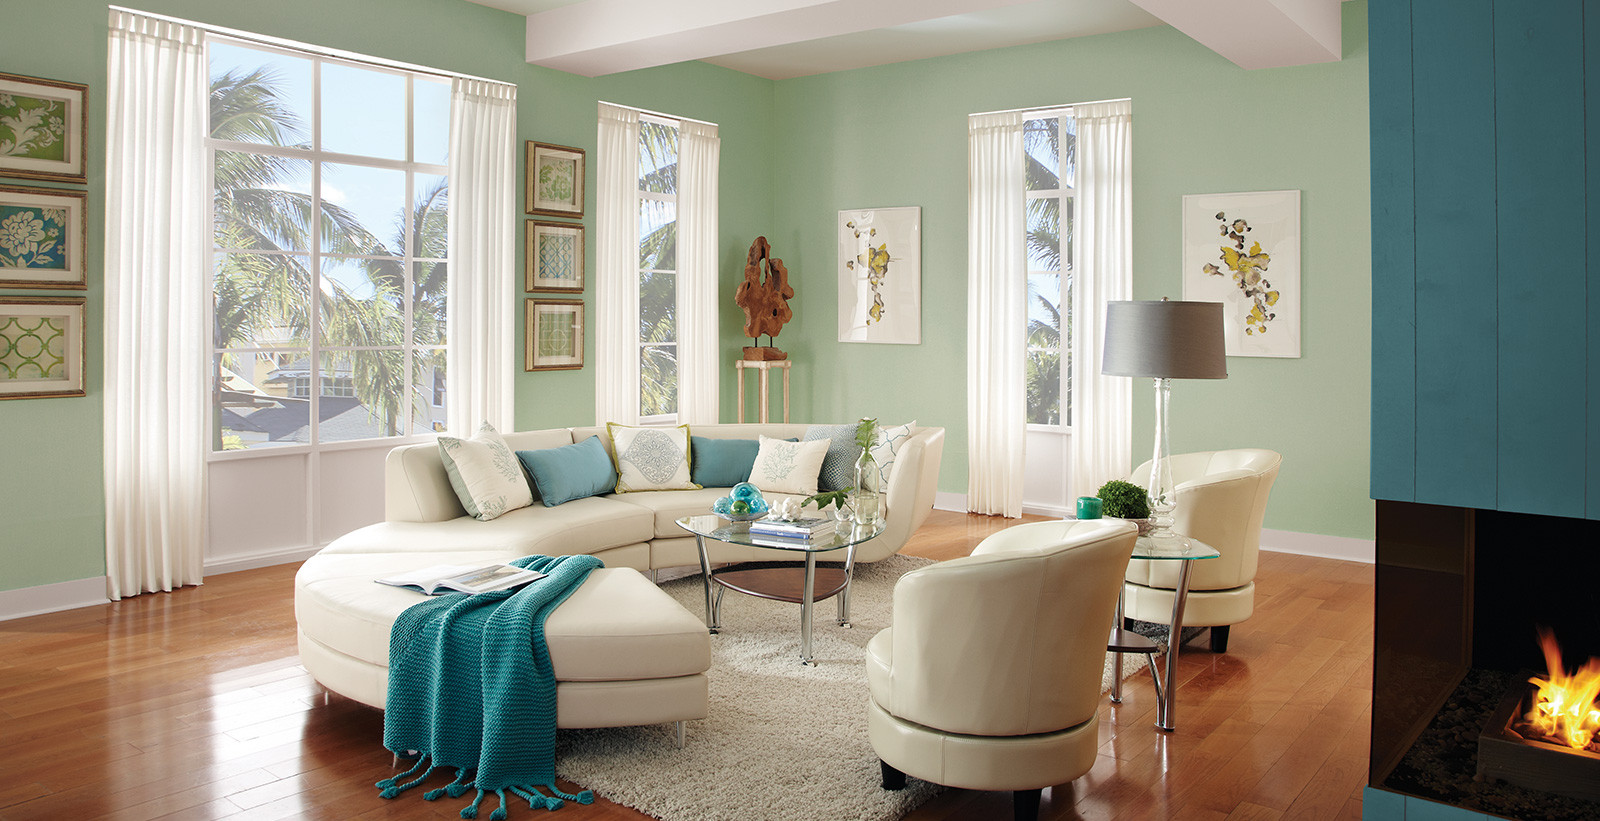 Living Room Paint Ideas
 Calming Living Room Ideas and Inspirational Paint Colors